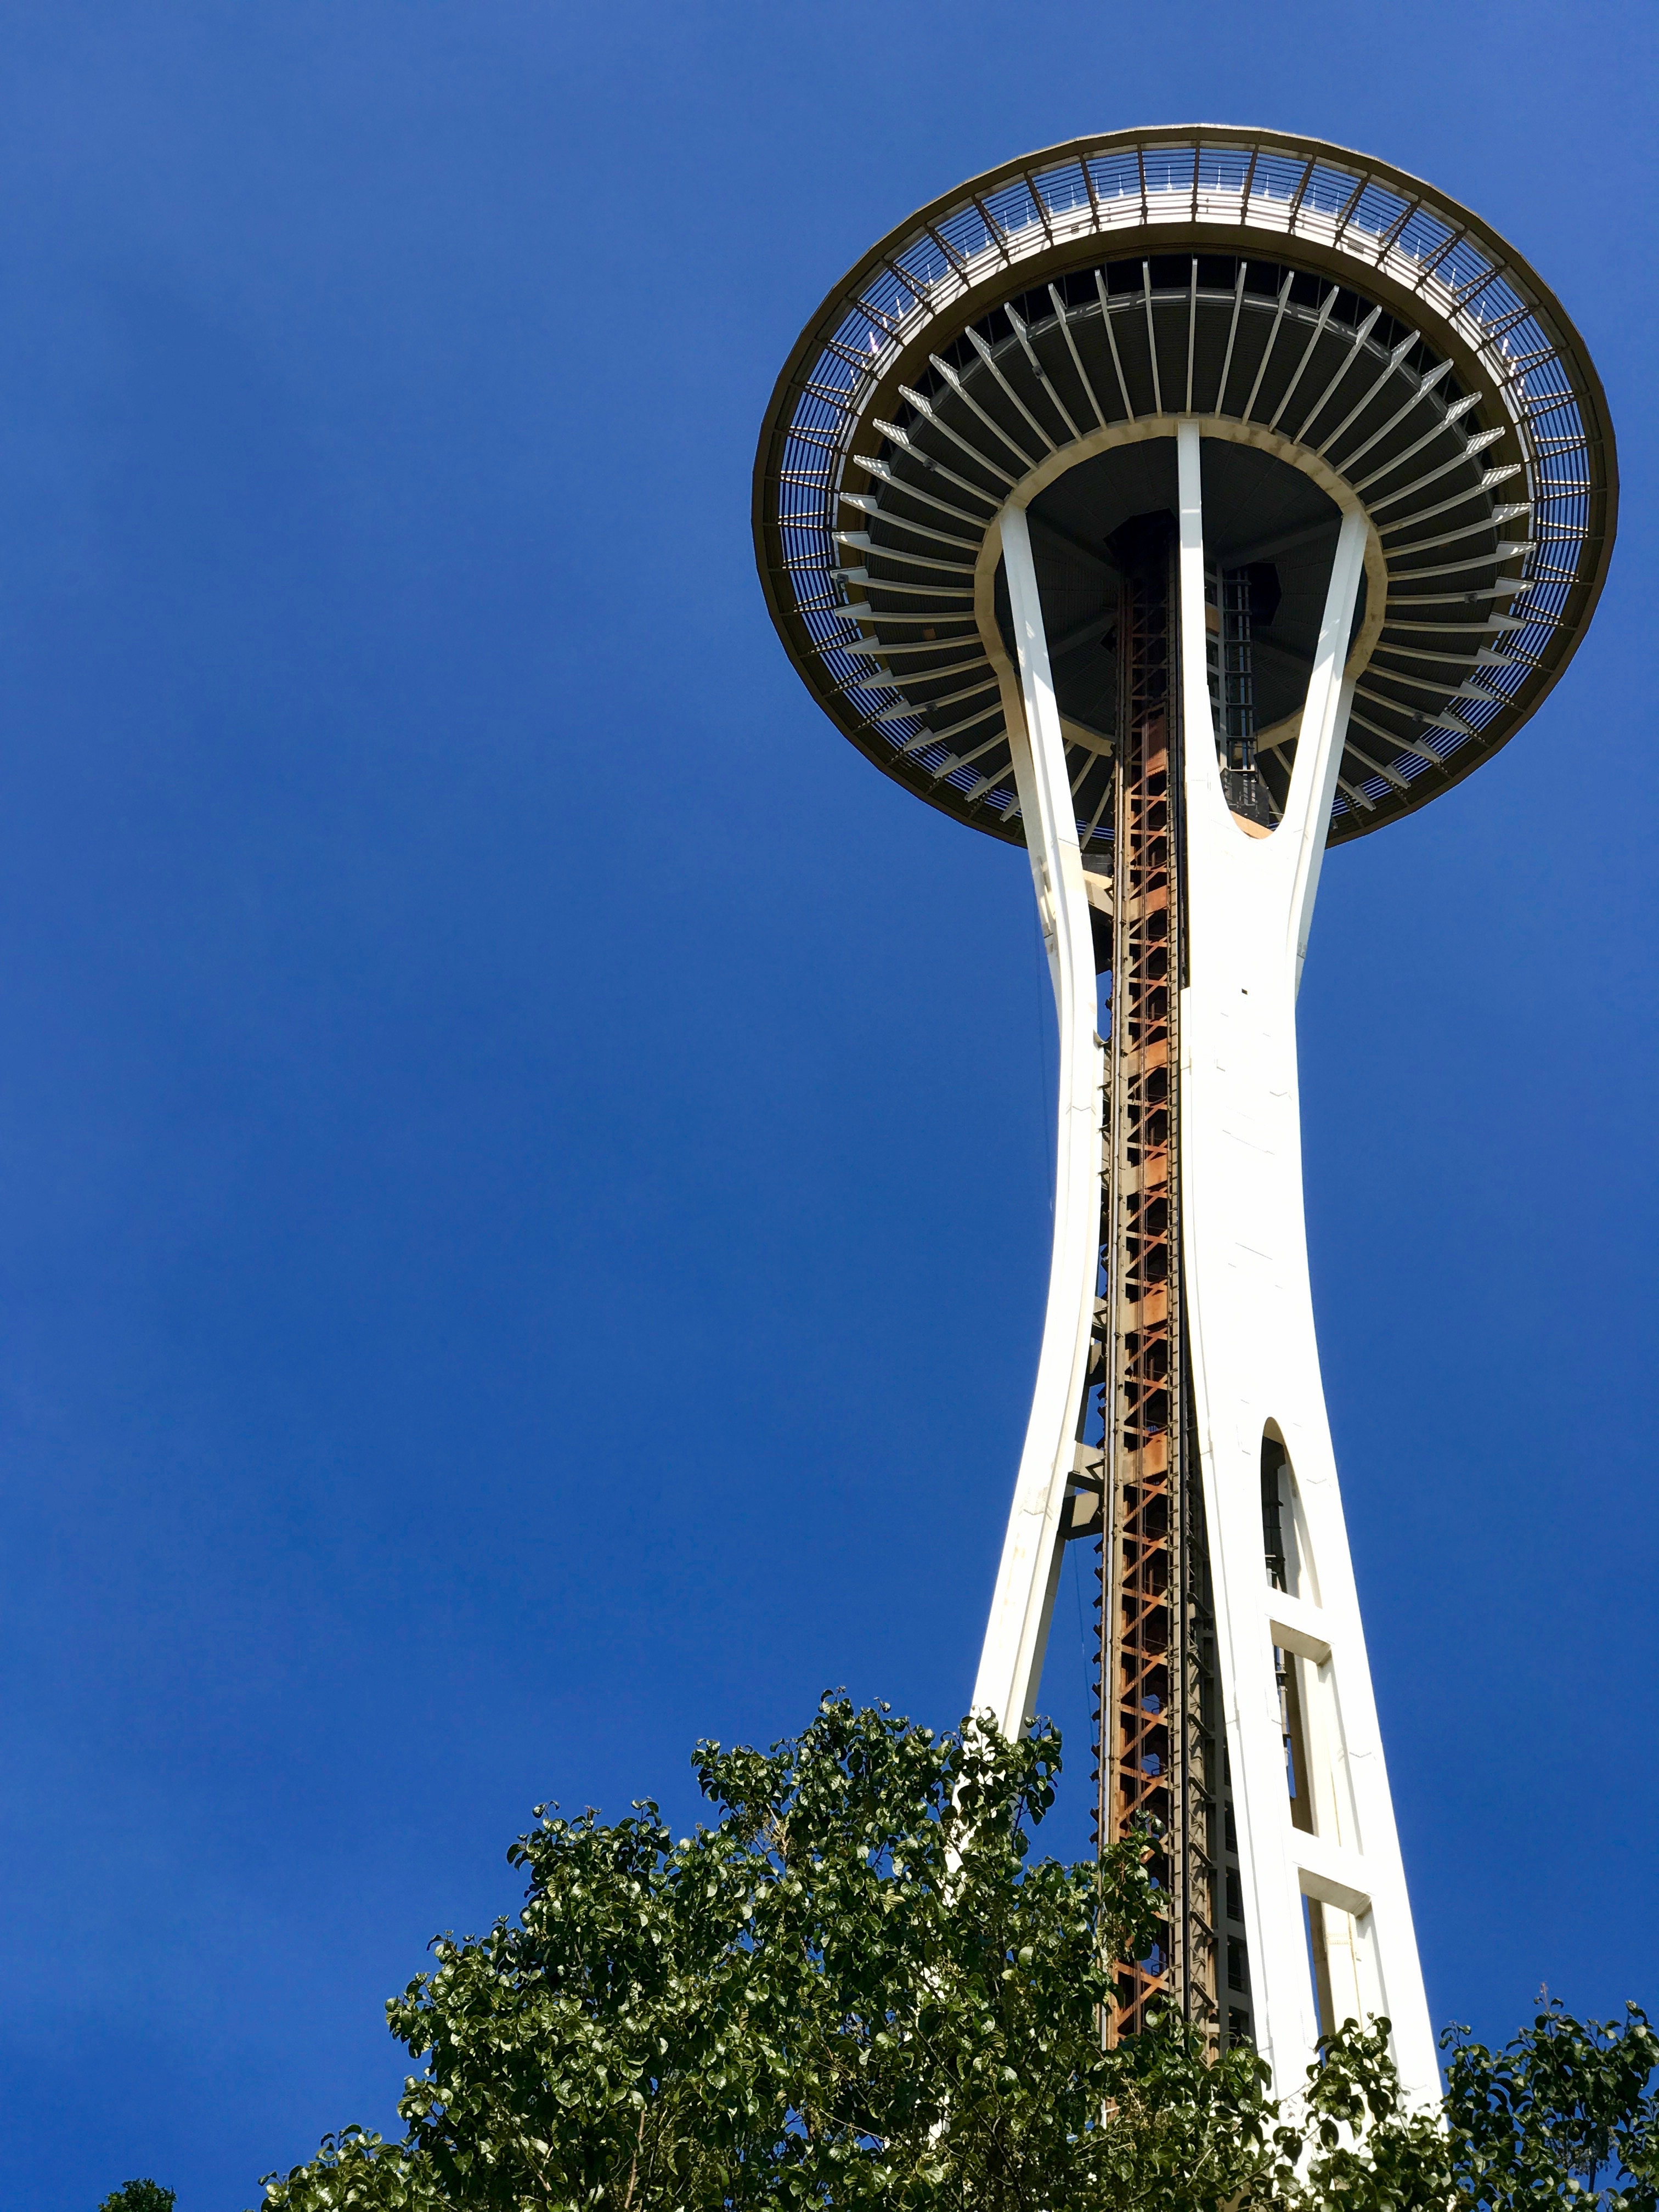 Seattle City Guide | The Hungry Chronicles